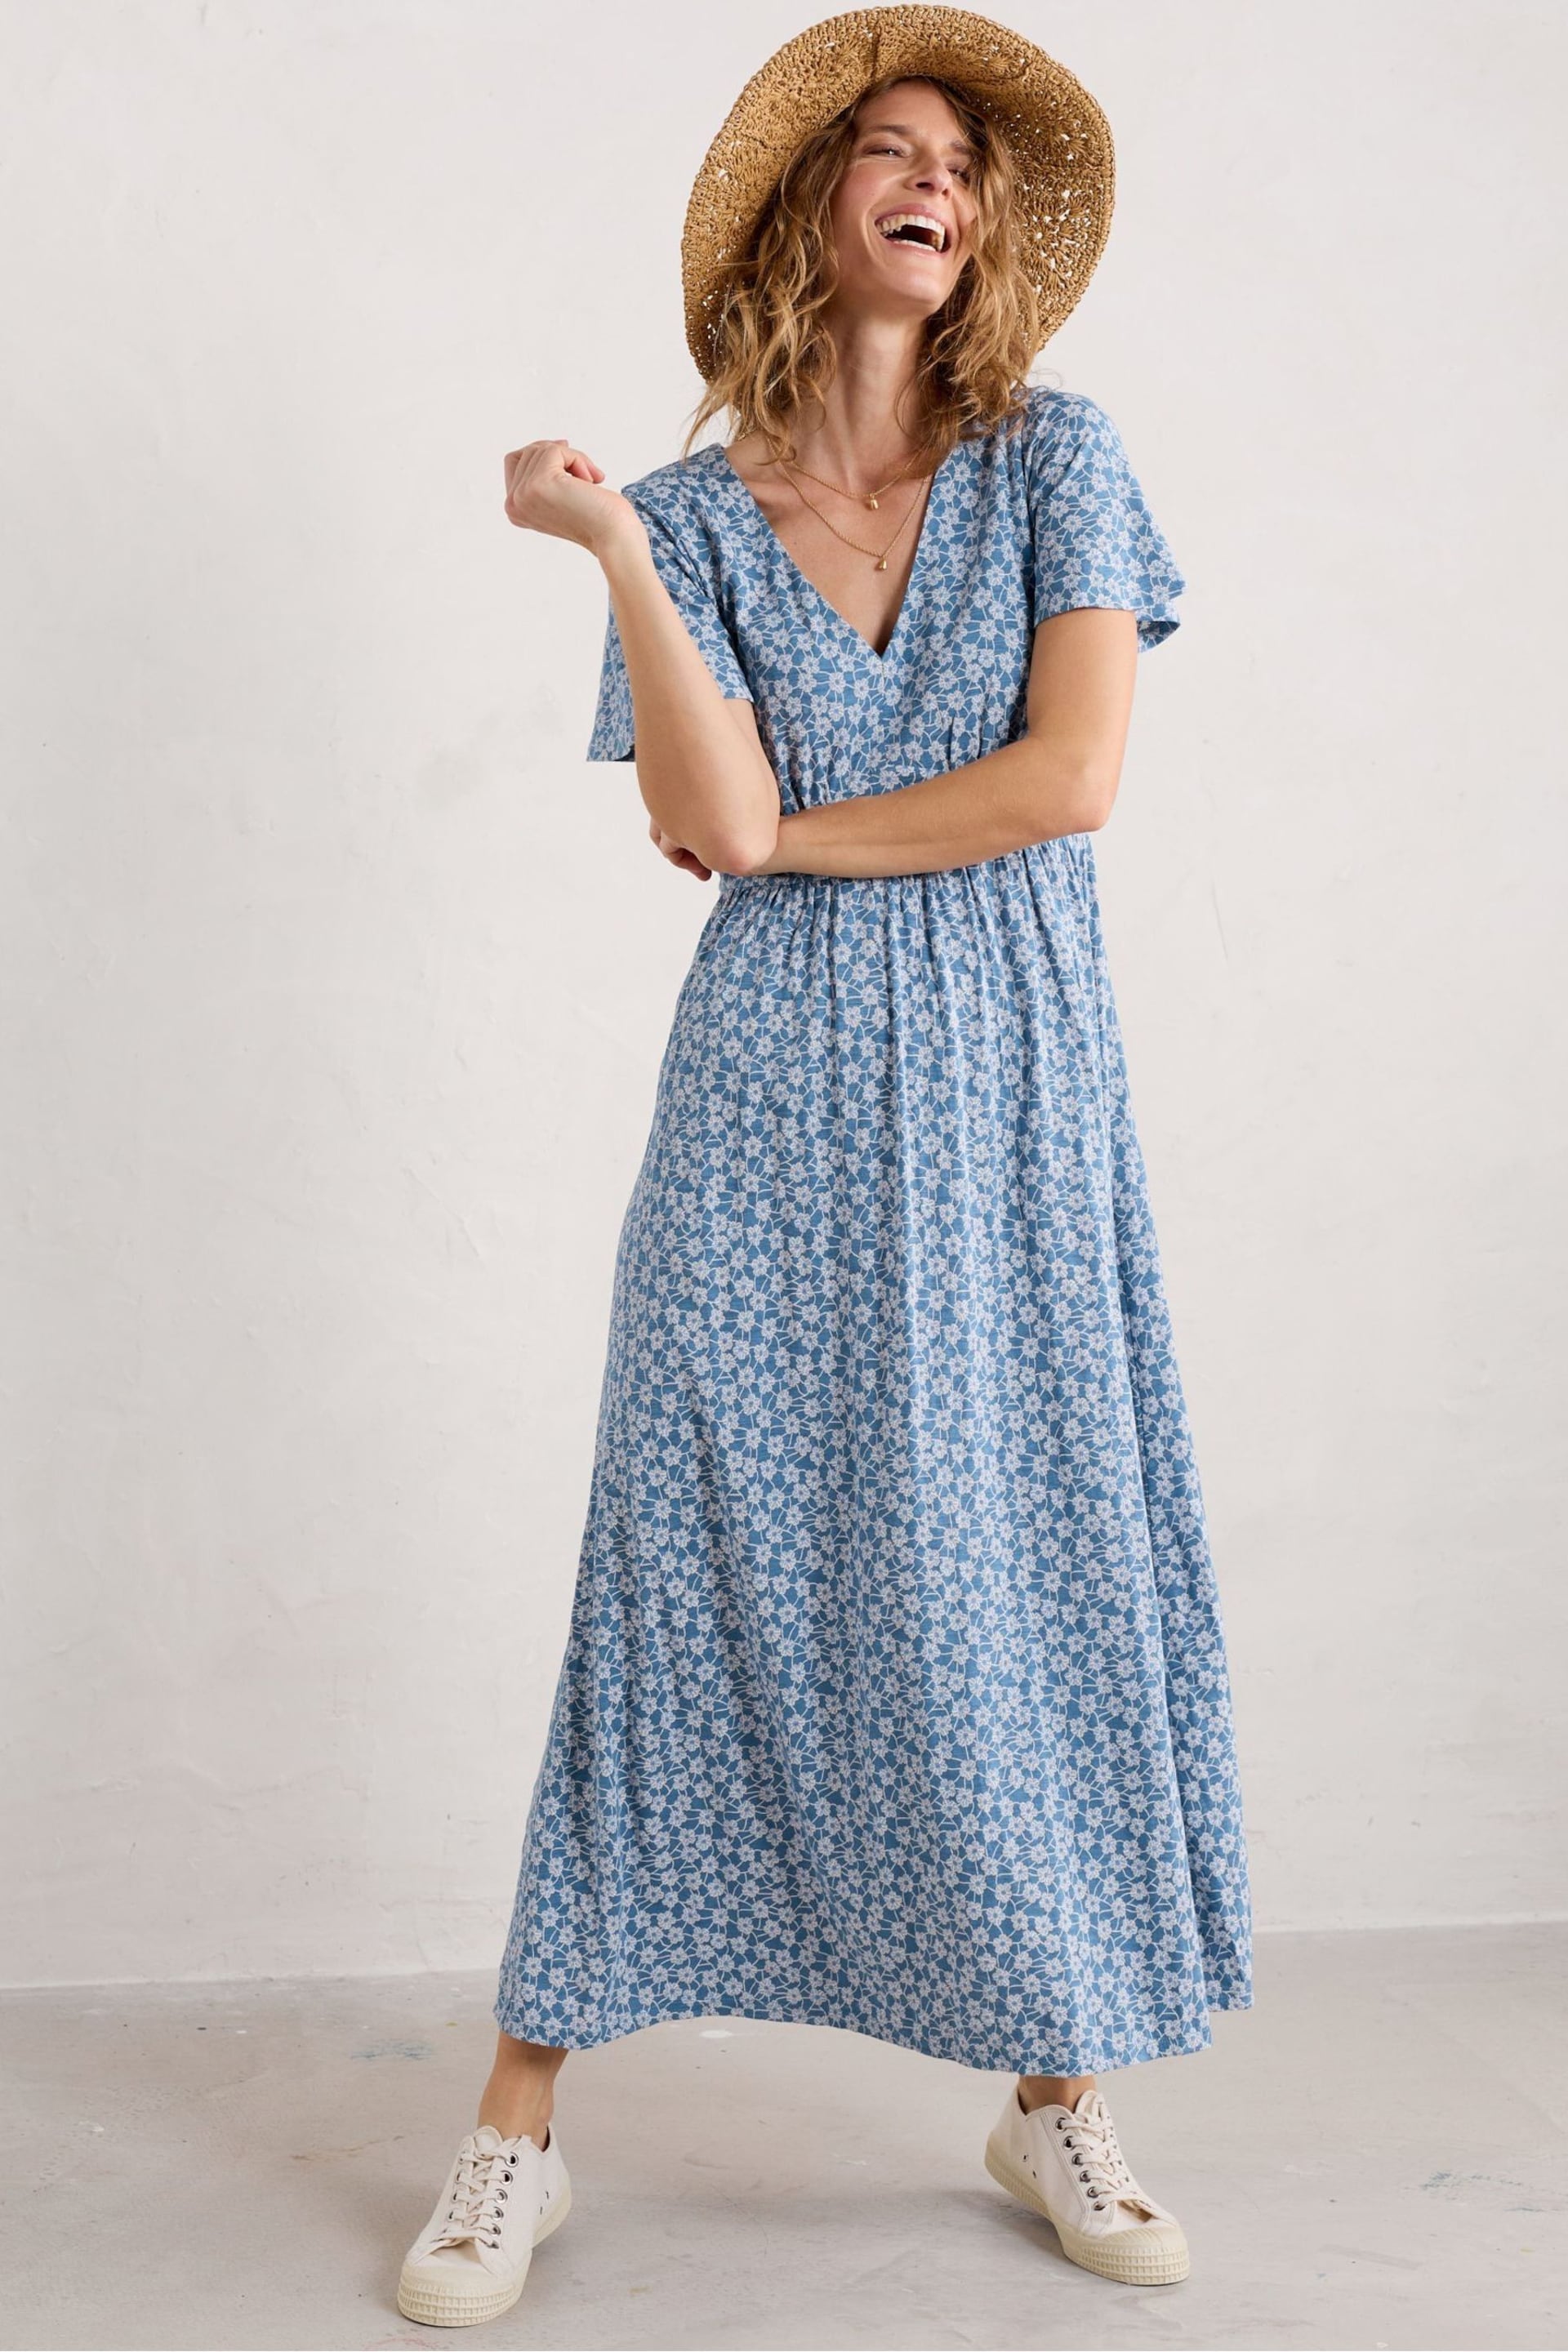 Seasalt Cornwall Blue Chateaux Dress - Image 1 of 5